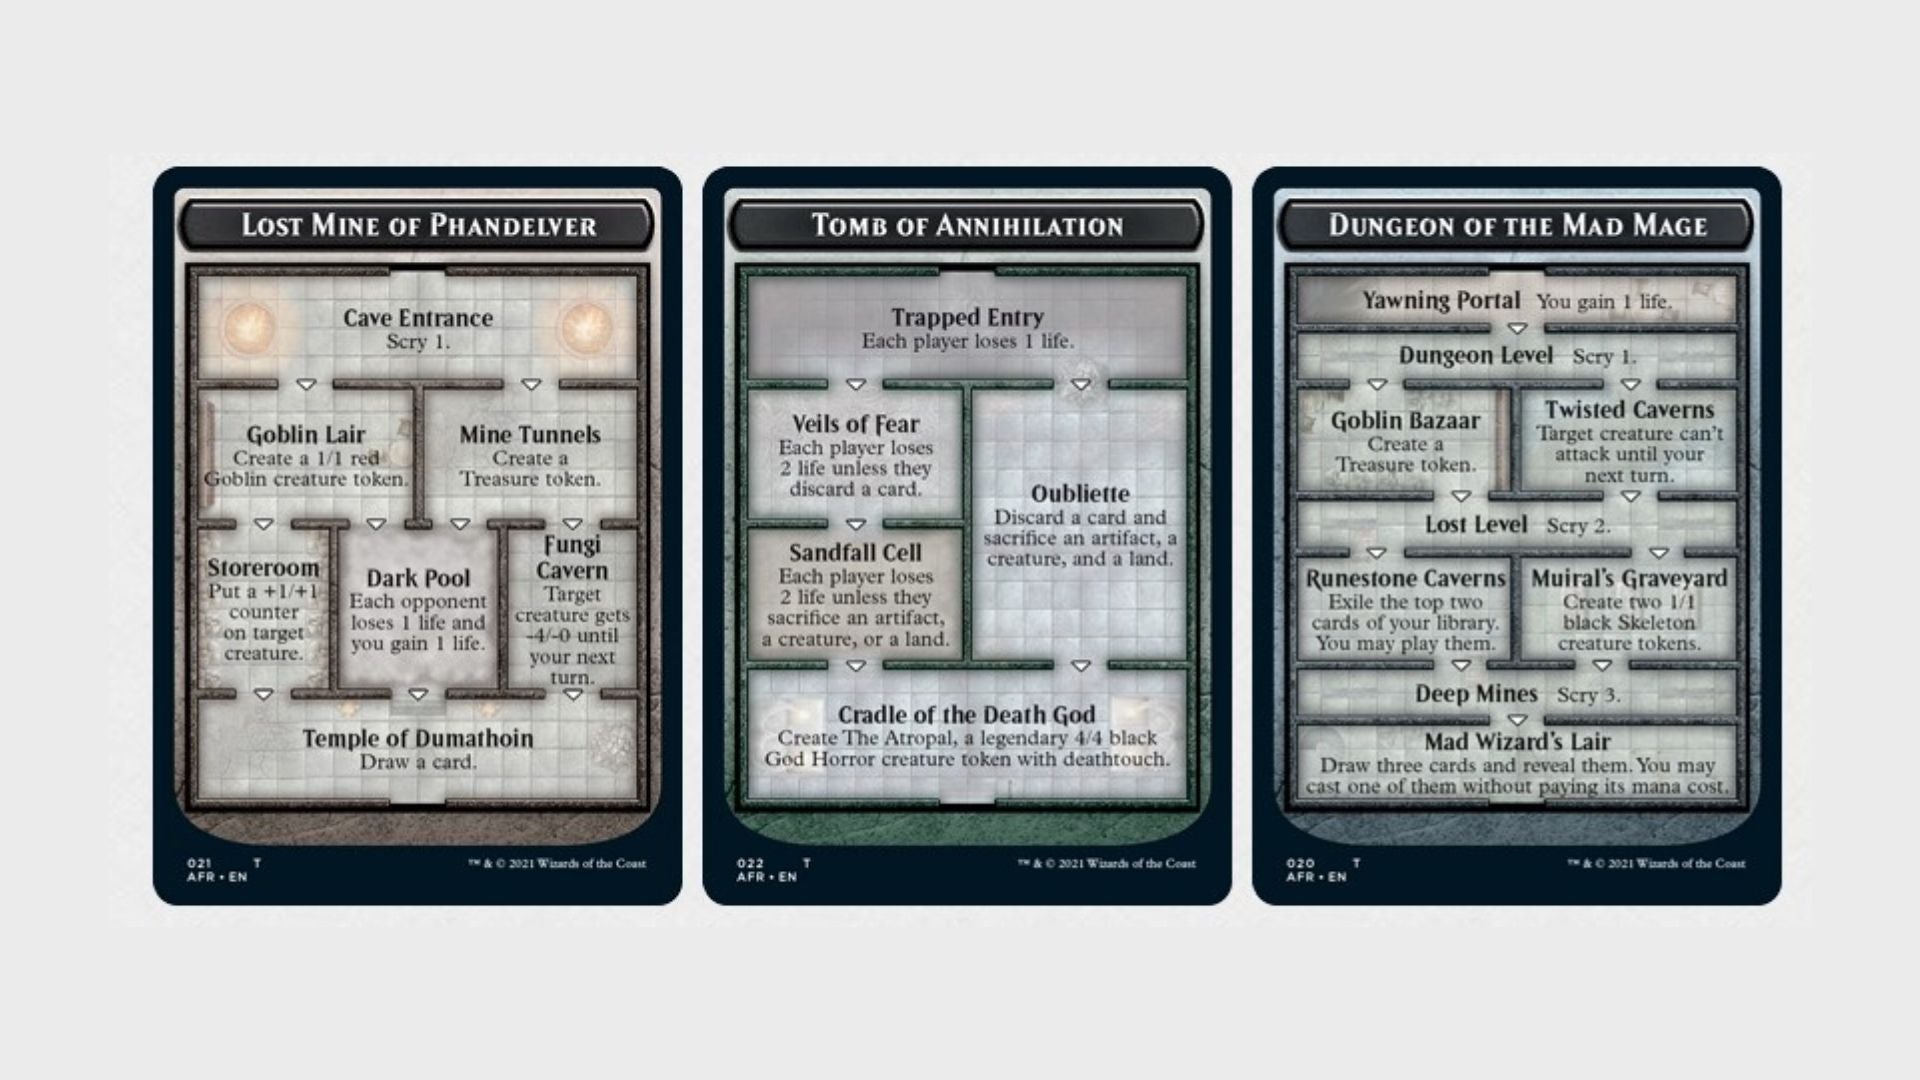 So stoked to see these dungeon cards in action. (Screenshot: Wizards of the Coast)